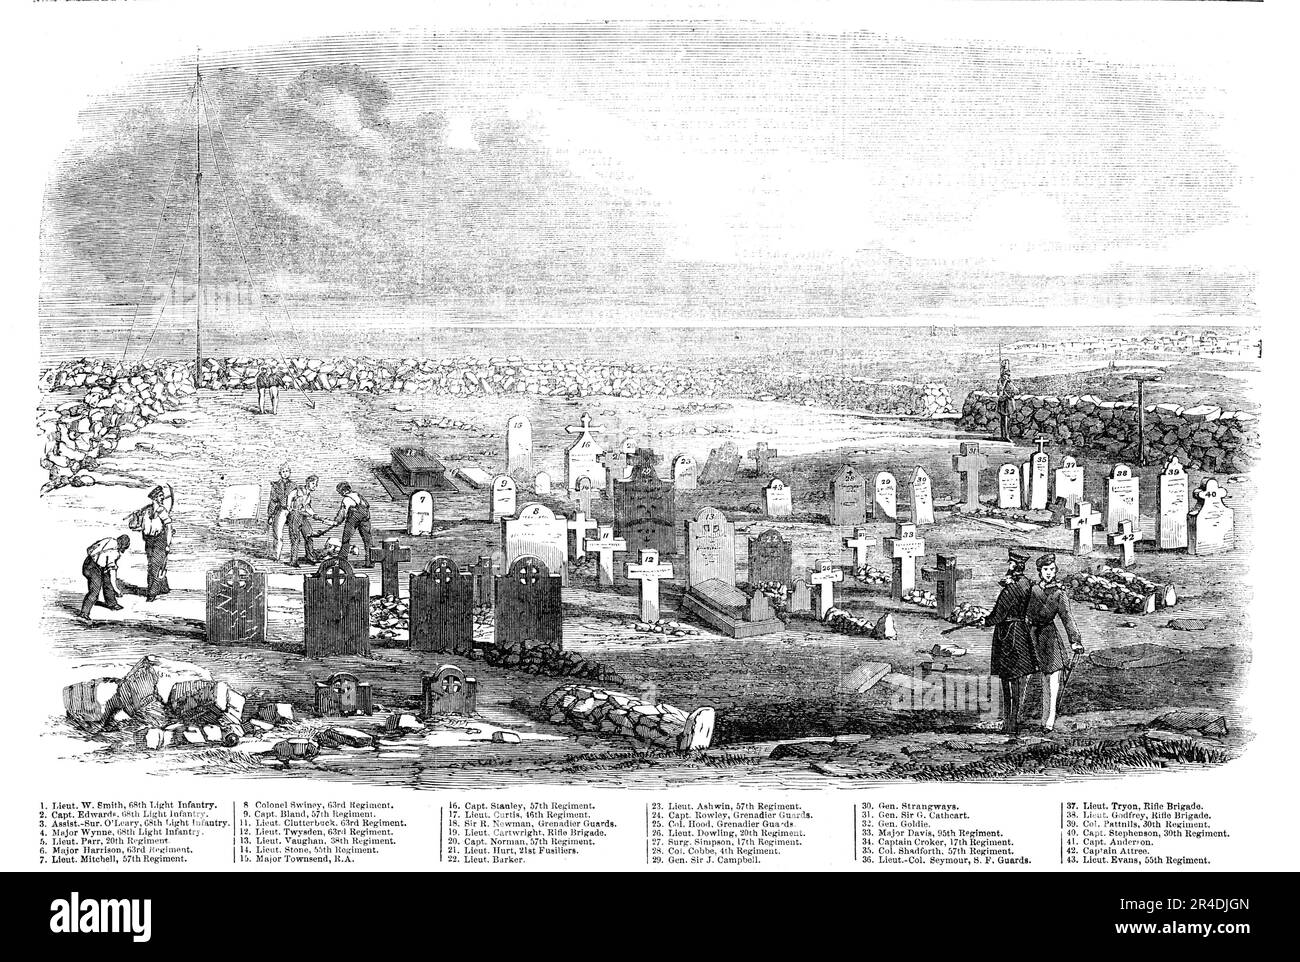 The Fourth Division Burial-ground, on Cathcart's Hill, Crimea, 1856. Crimean War. 'This Illustration possesses a melancholy interest, and will naturally be appreciated by those in England whose relatives and friends have fallen in battle and at the siege, and now rest upon Cathcart's Hill...[Shown here are] deceased officers' tombs, with their names...The tombs of the officers of the 68th Regiment are alike - red Maltese marble; those of the 57th, white marble; and the 63rd, stone crosses. A very handsome memorial is shown, in jet-black marble, to Sir R. Newman, Grenadier Guards. The monument Stock Photo